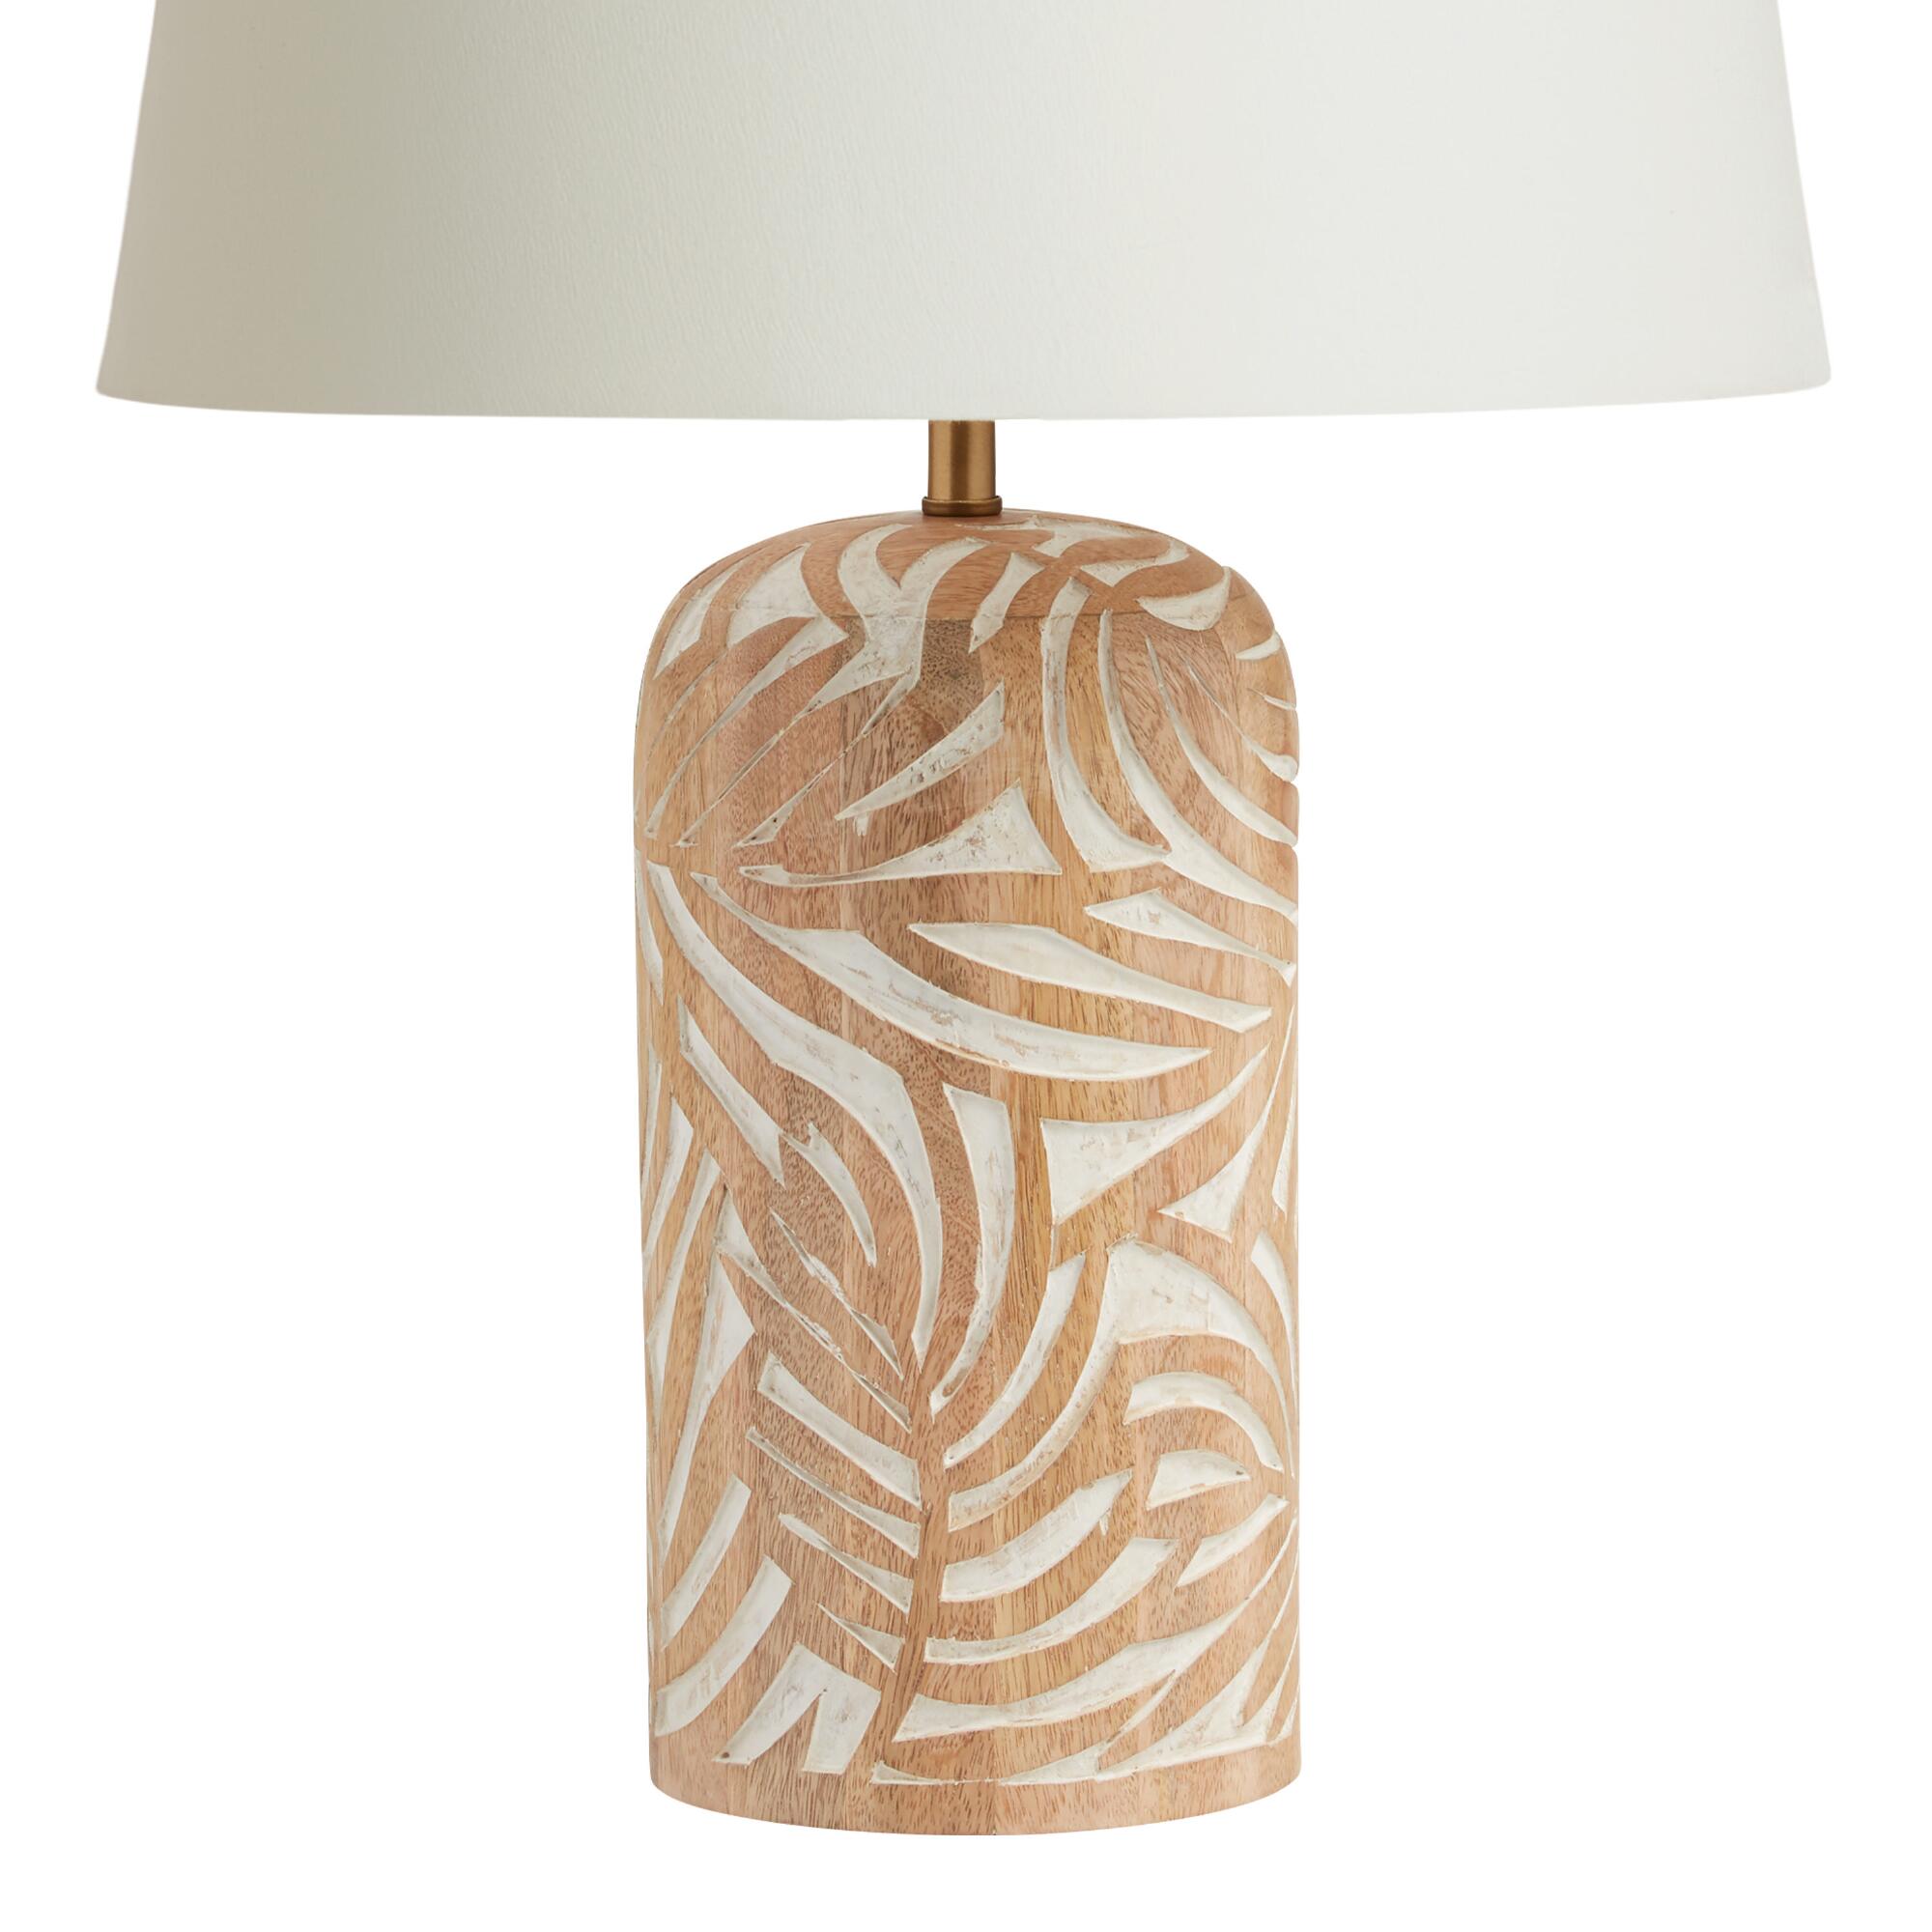 Natural Carved Wood Leaf Sura Table Lamp Base: White - Medium by World Market